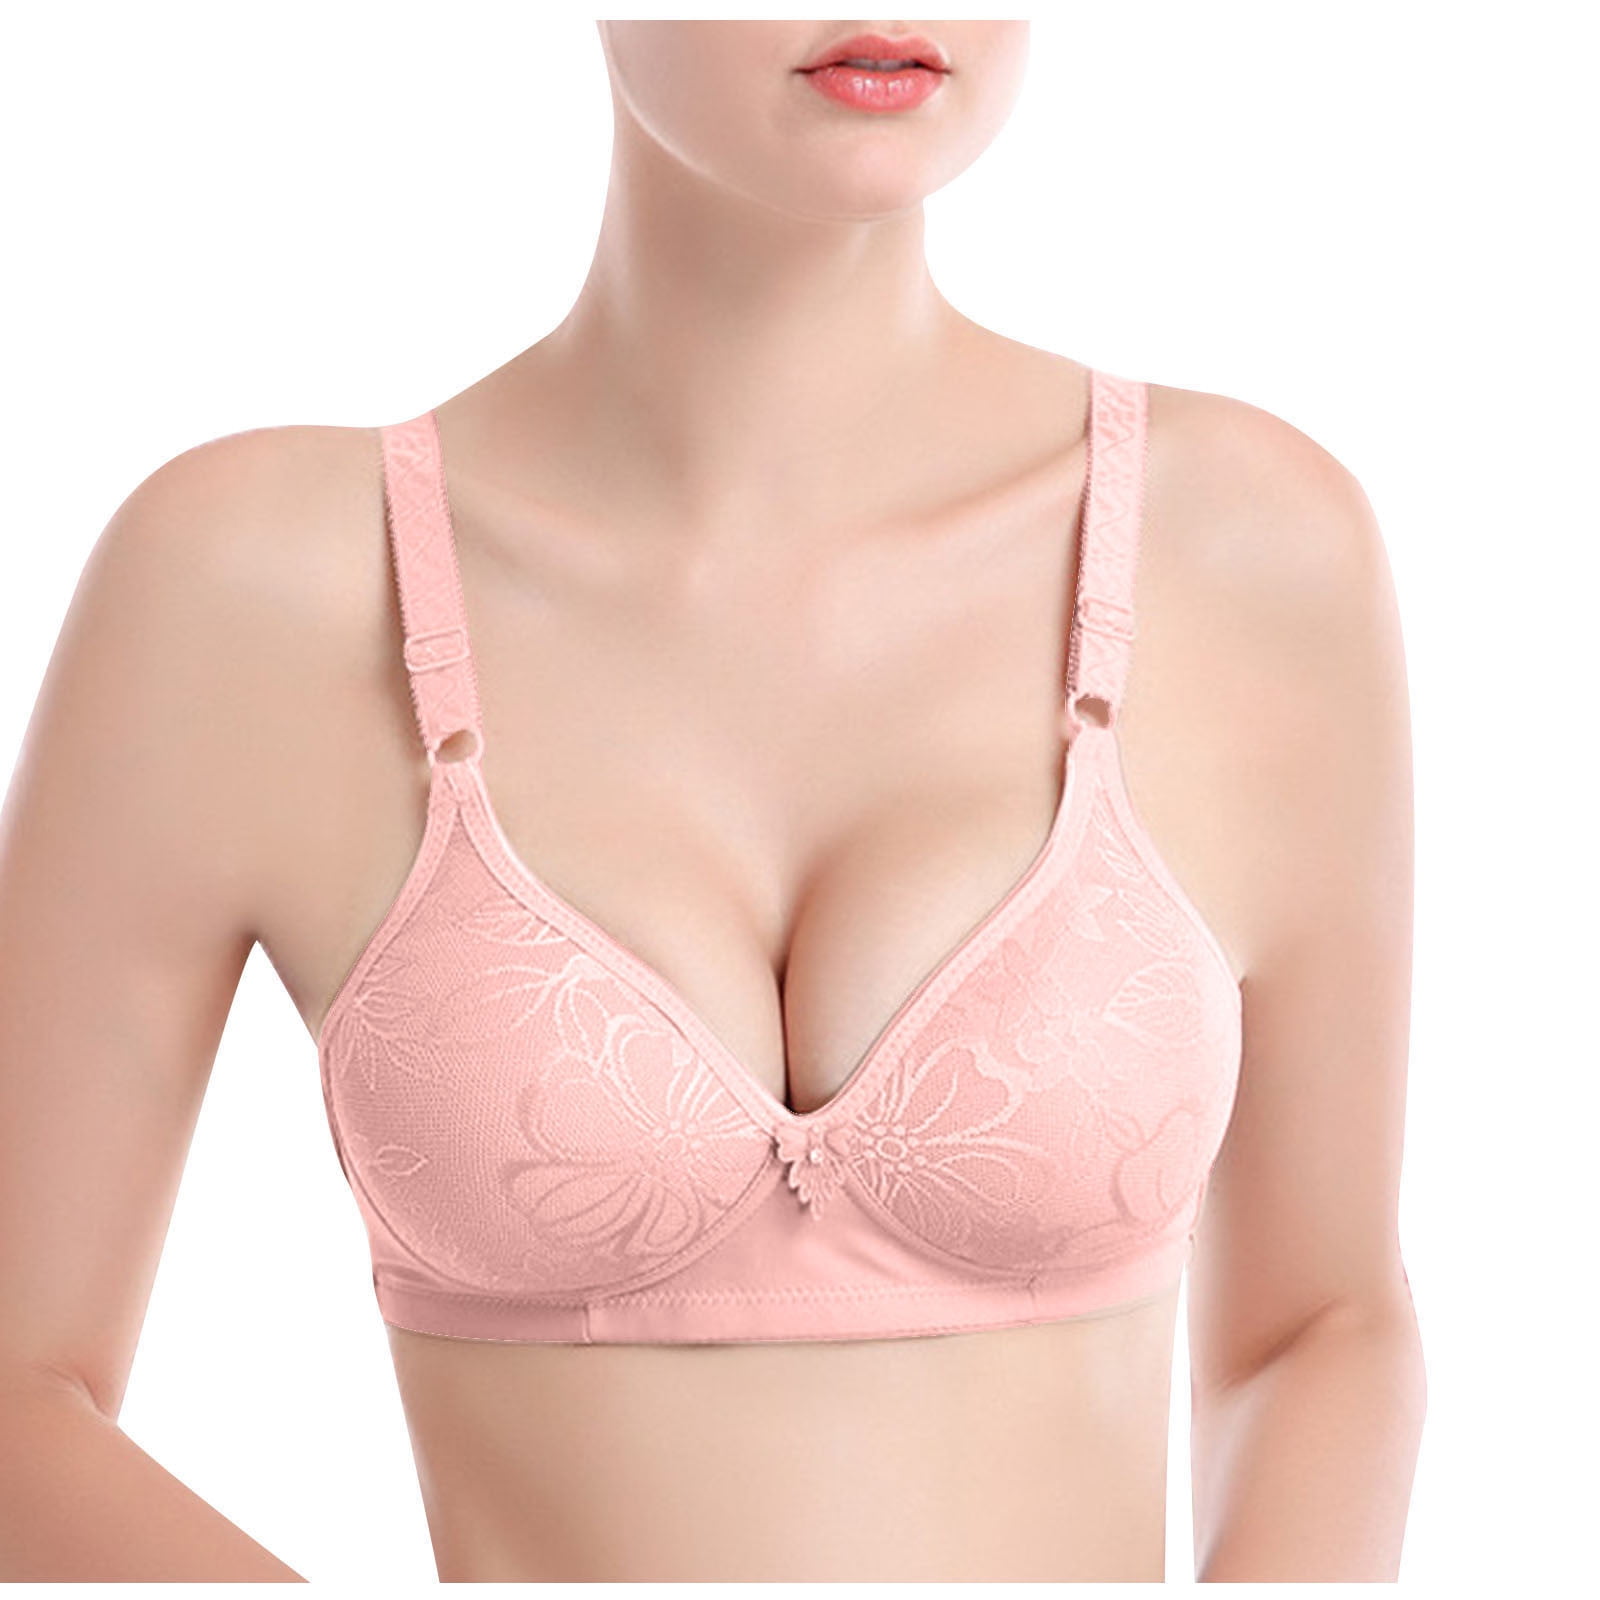 Elainilye Fashion Womens Bras Non-Underwire Lace Comfortable Breathable  Traceless Back Support Bra Extra-Elastic Underwire